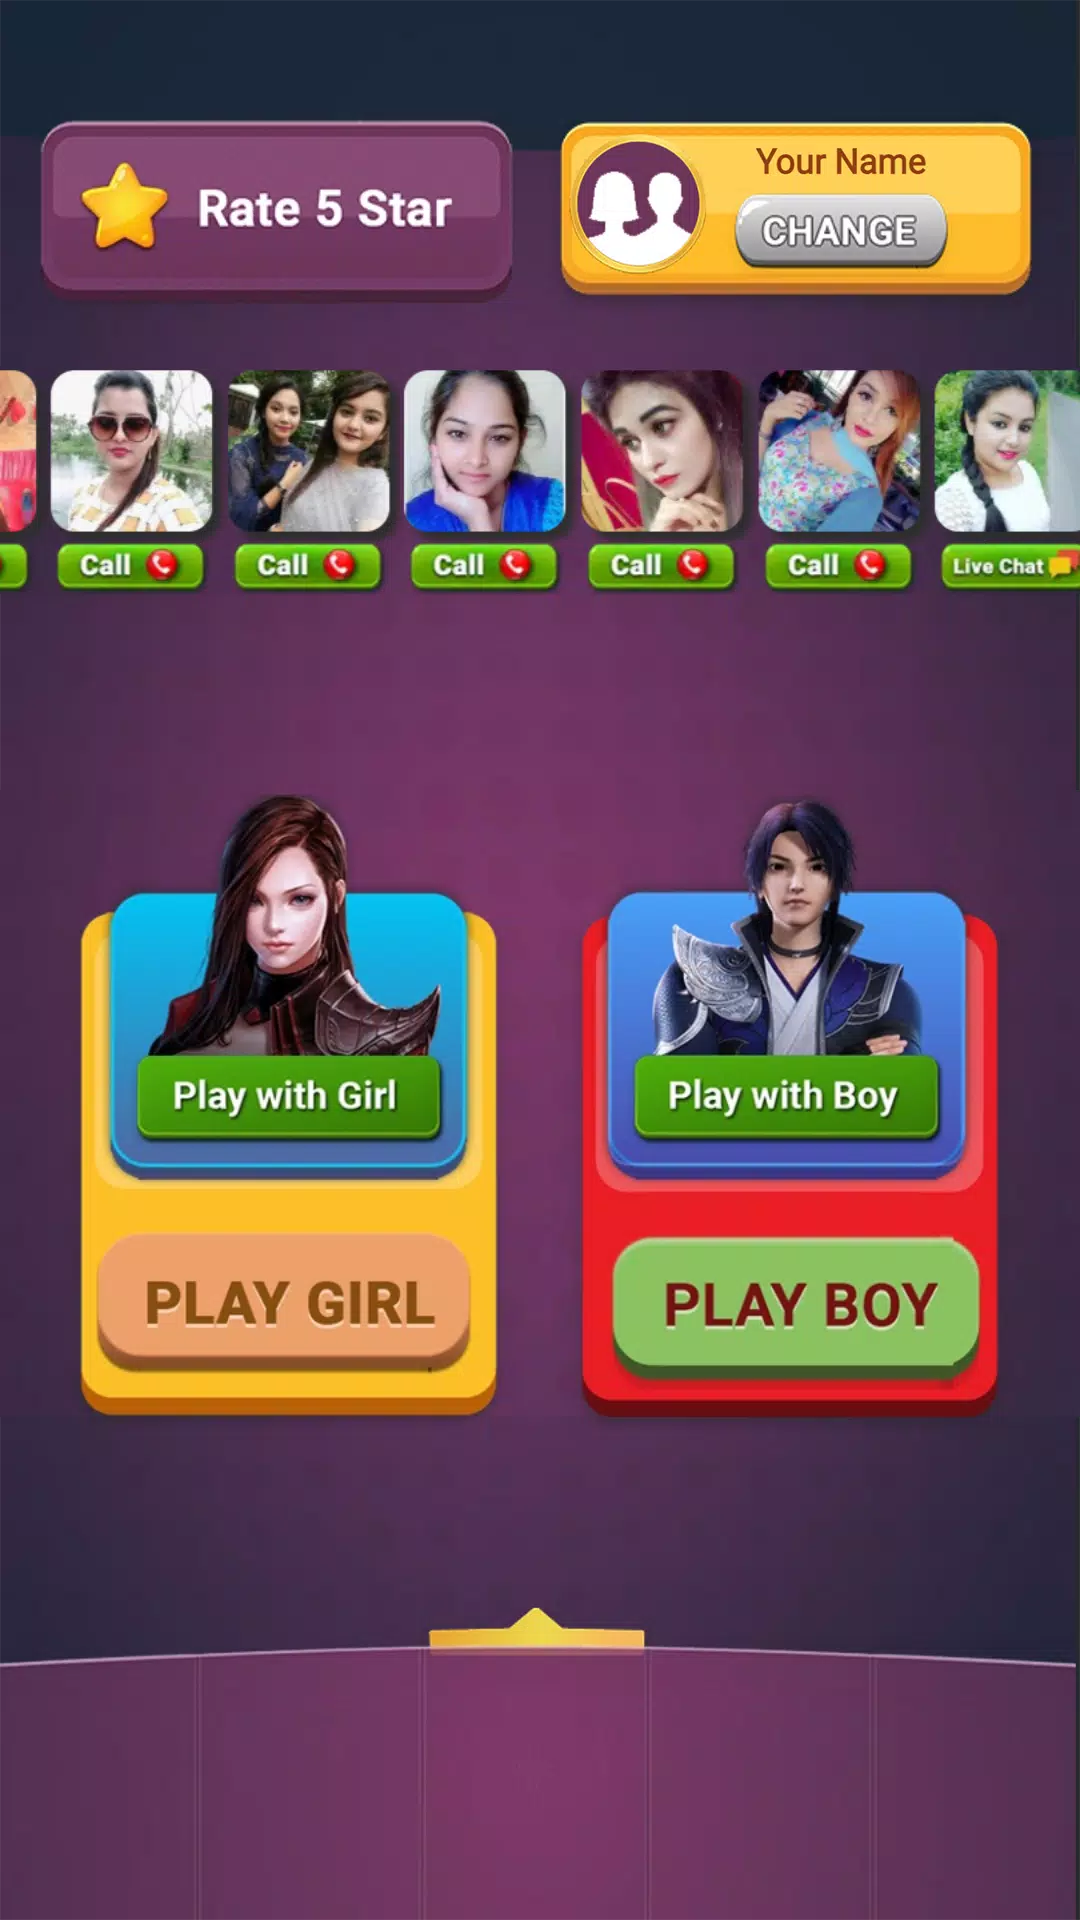 Online Ludo Video Chat